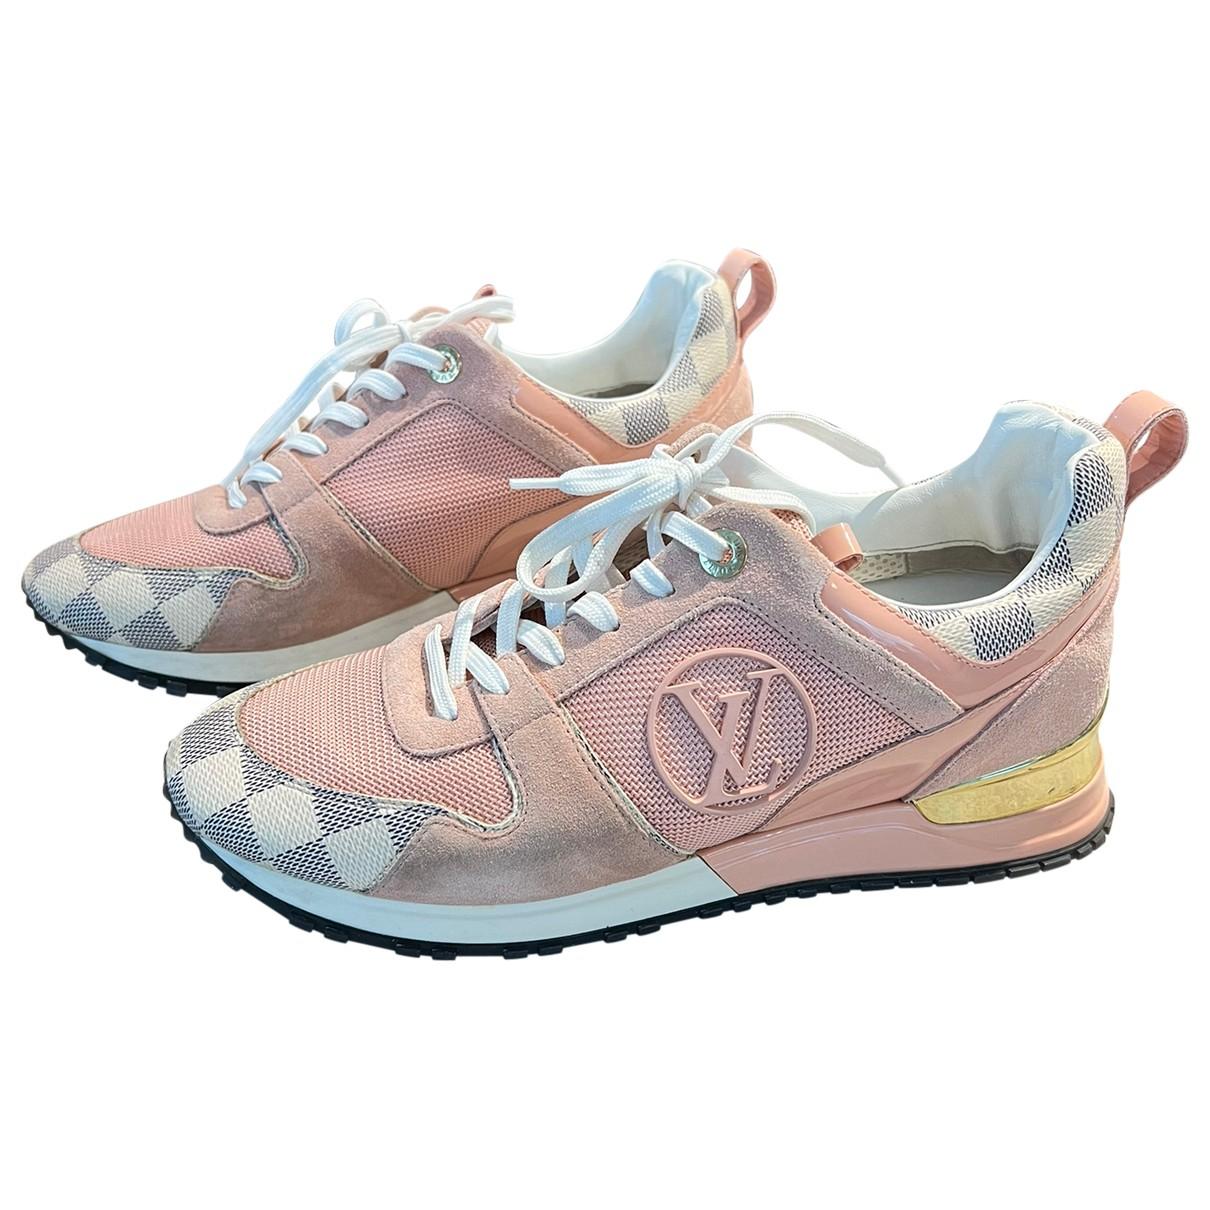 Run away leather trainers Louis Vuitton Pink size 41 EU in Leather -  31712038